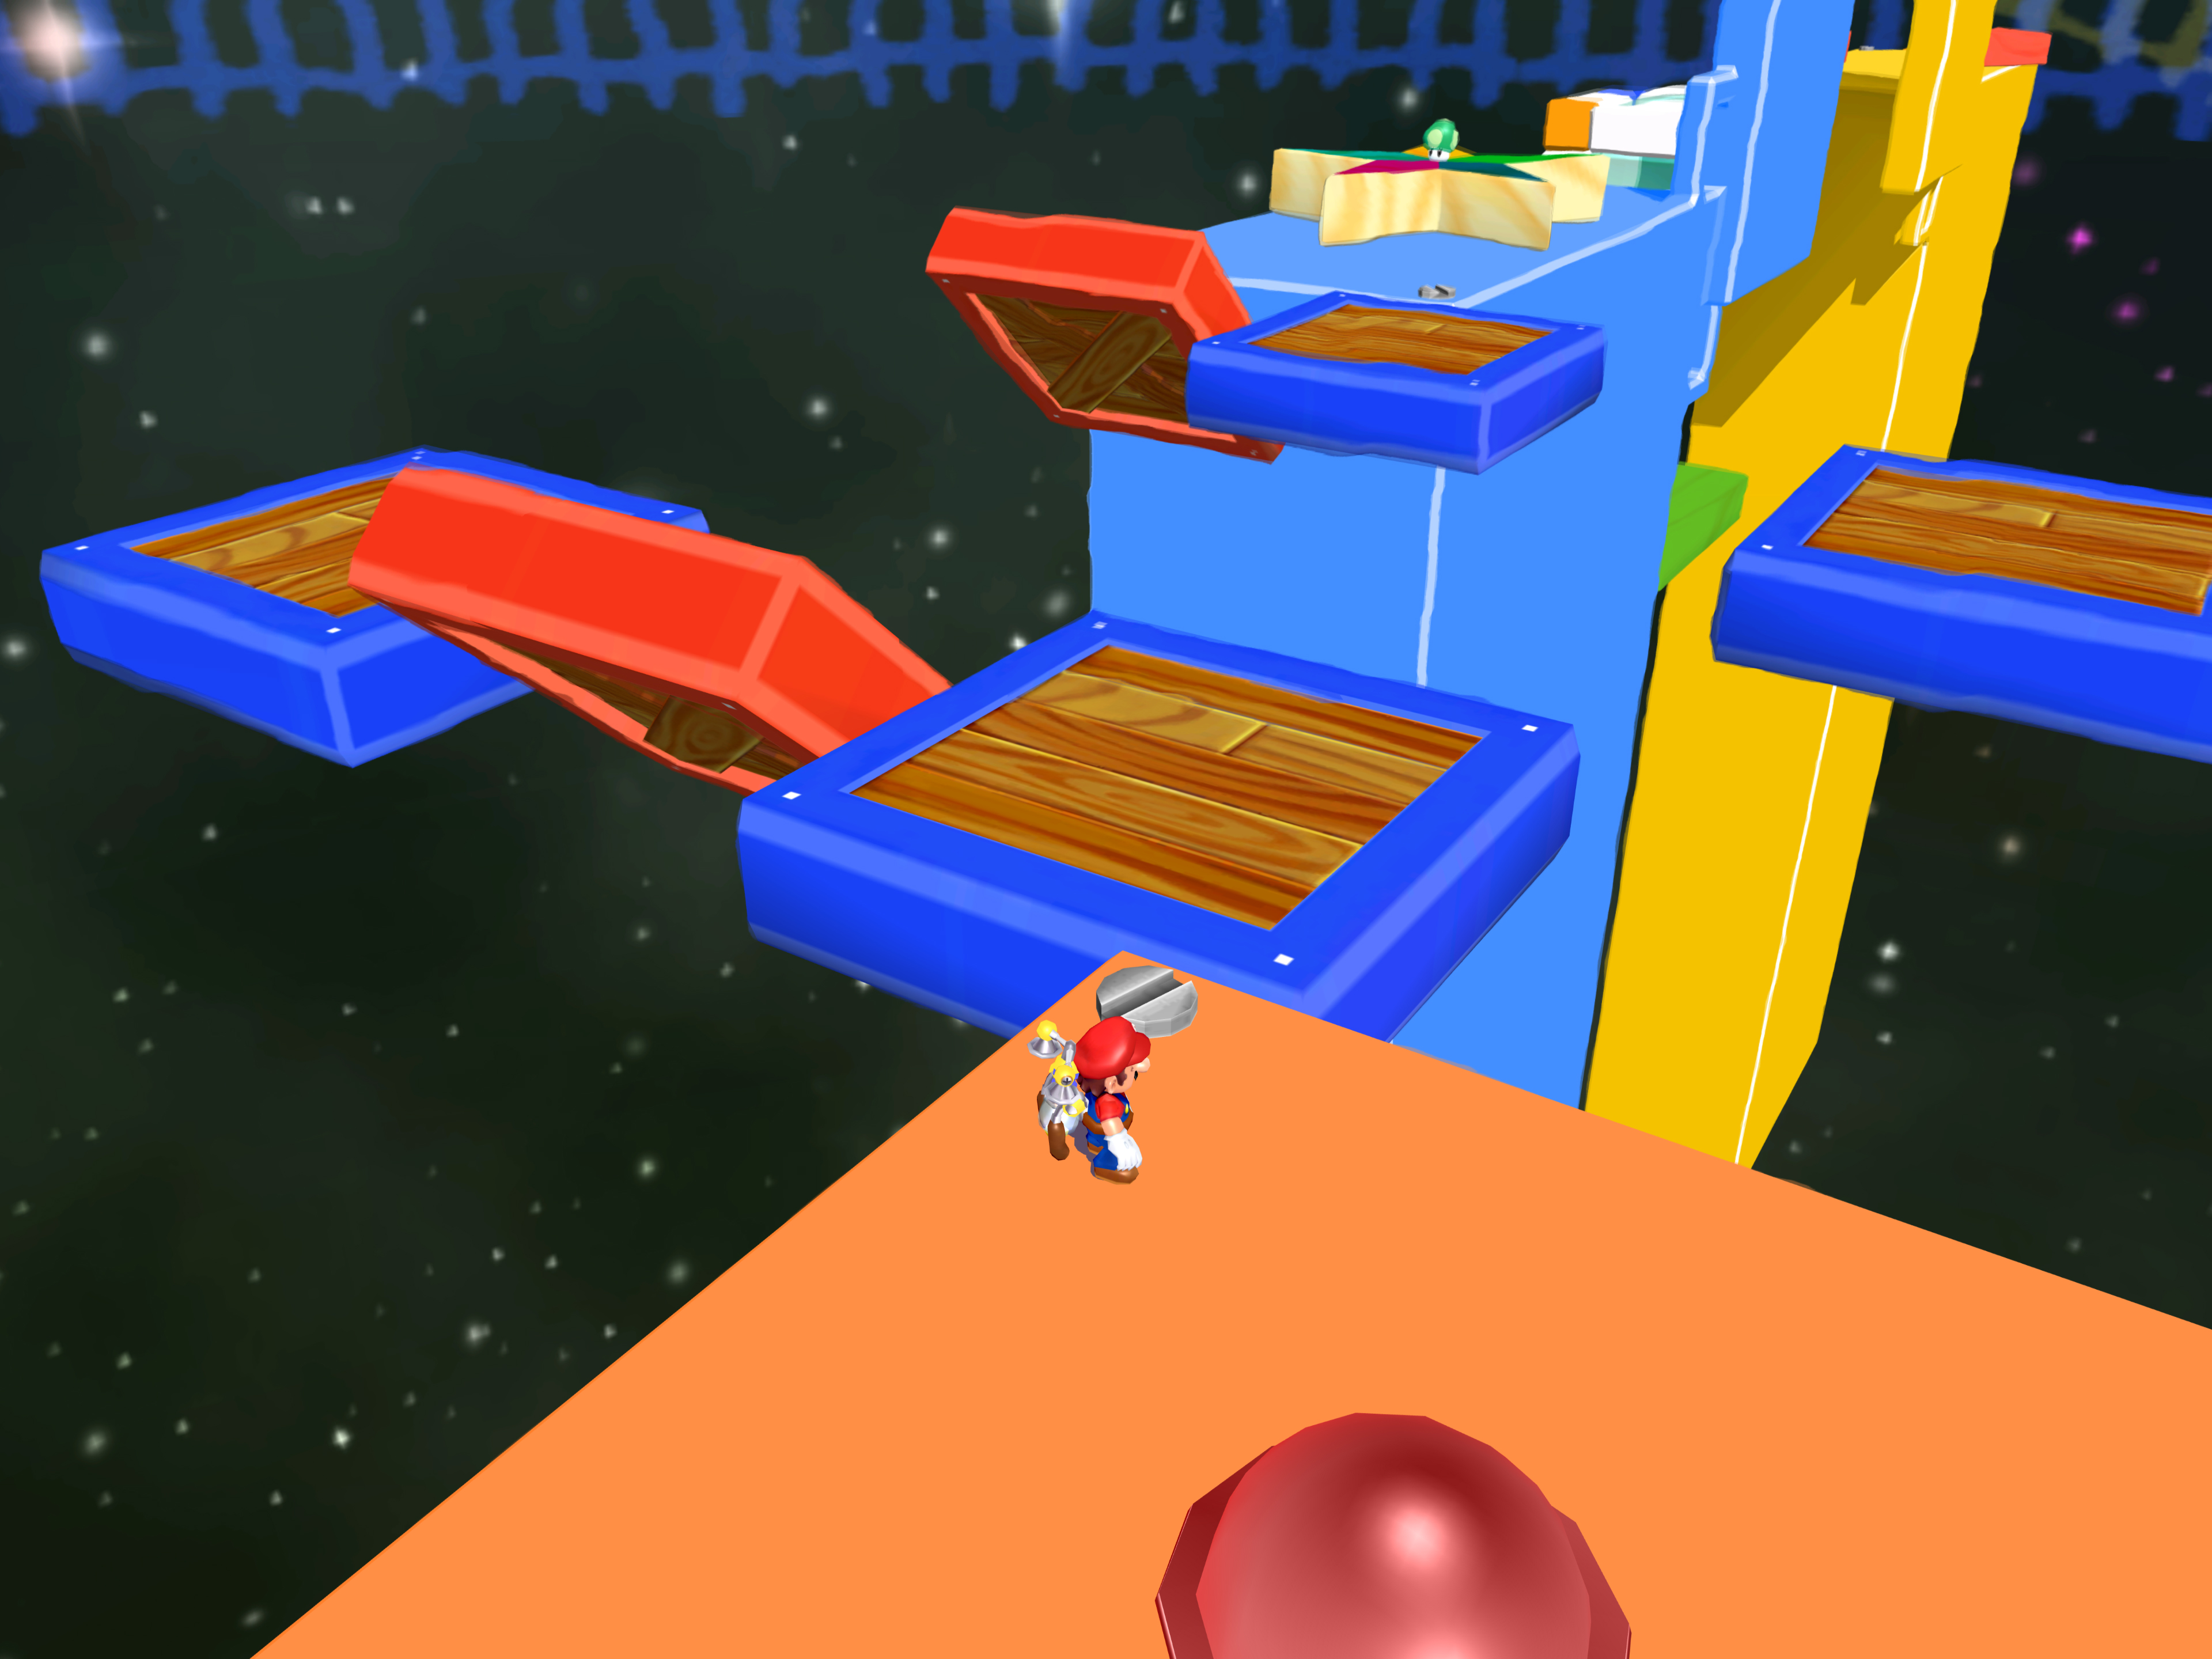 Super Mario 3D All-Stars - Super Mario Sunshine area accidentally shows  cubes used for debugging